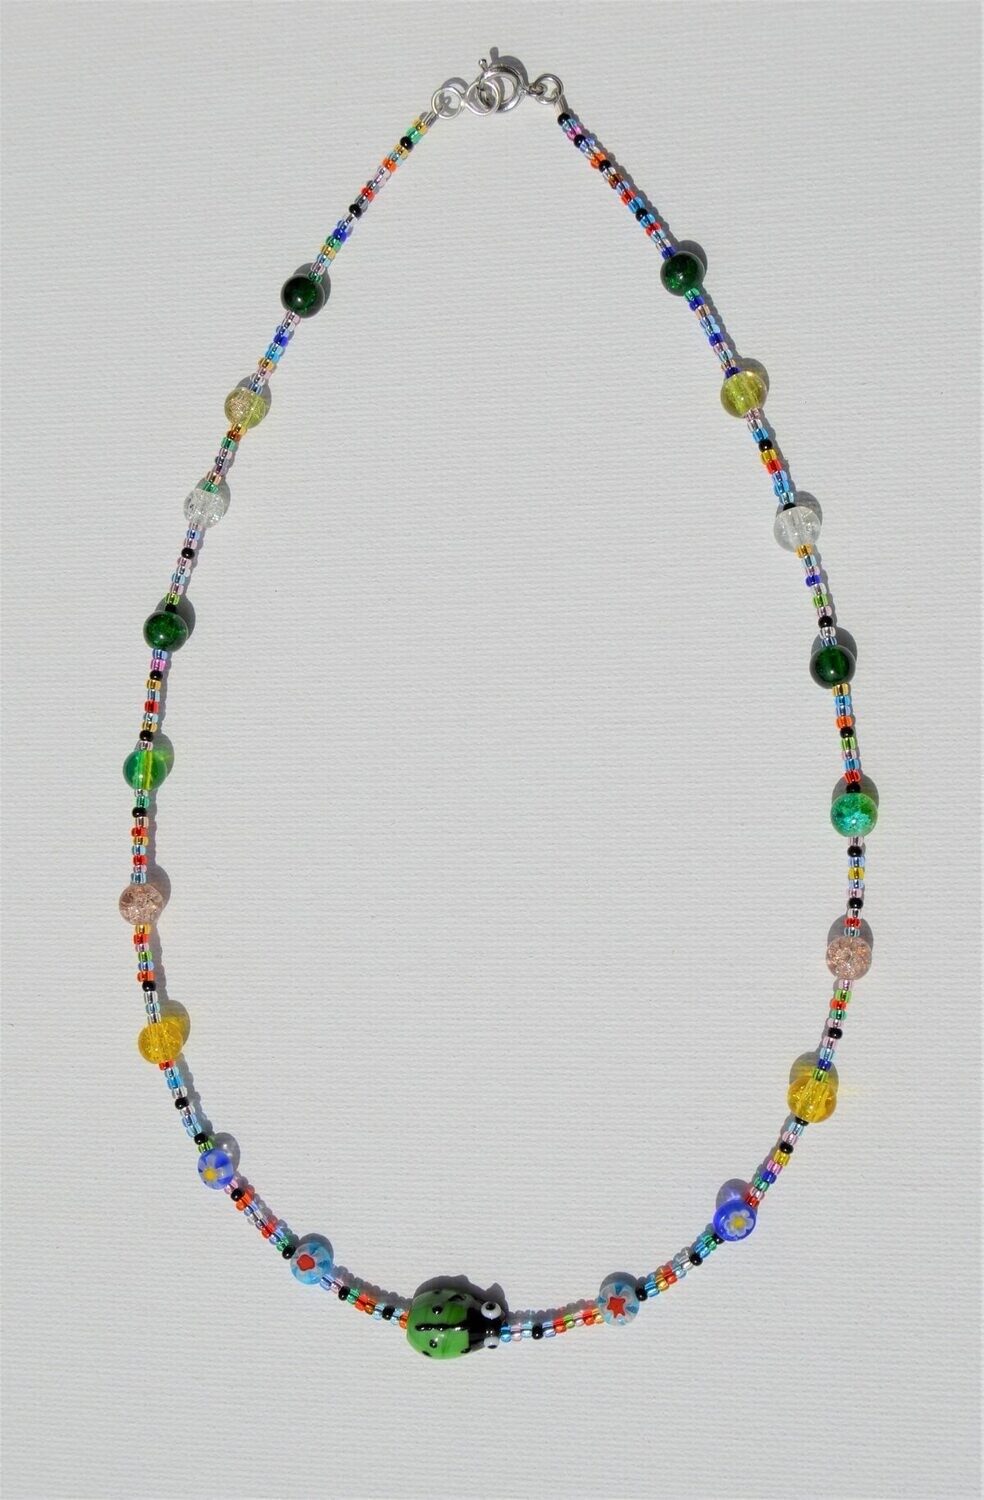 Handstrung Necklace with Glass Beads with Green Ladybug.